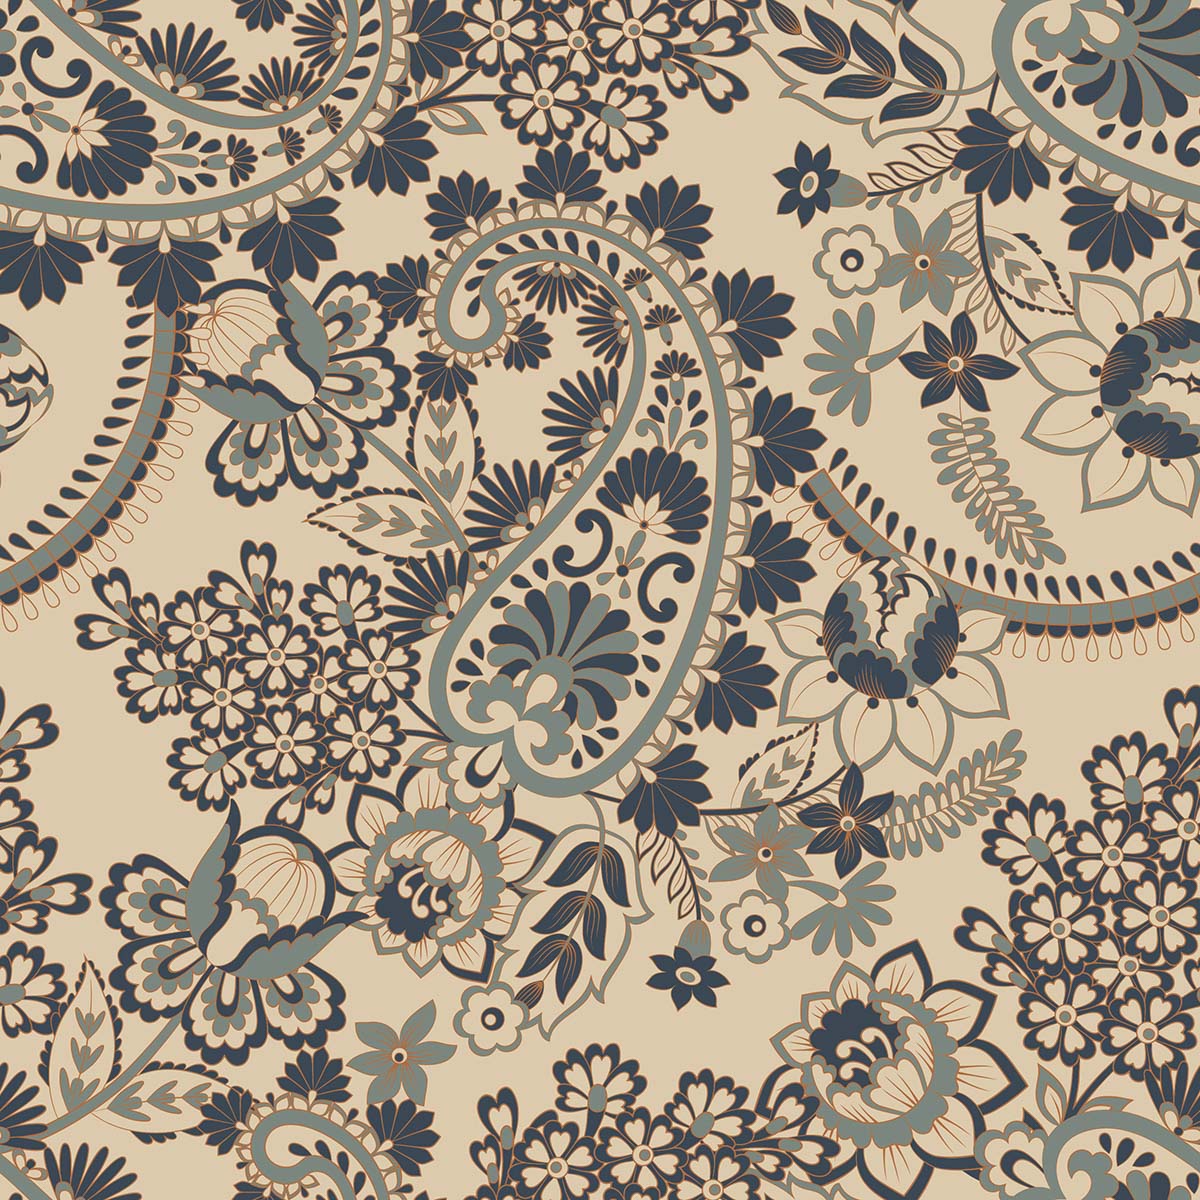 A paisley pattern on a beige background